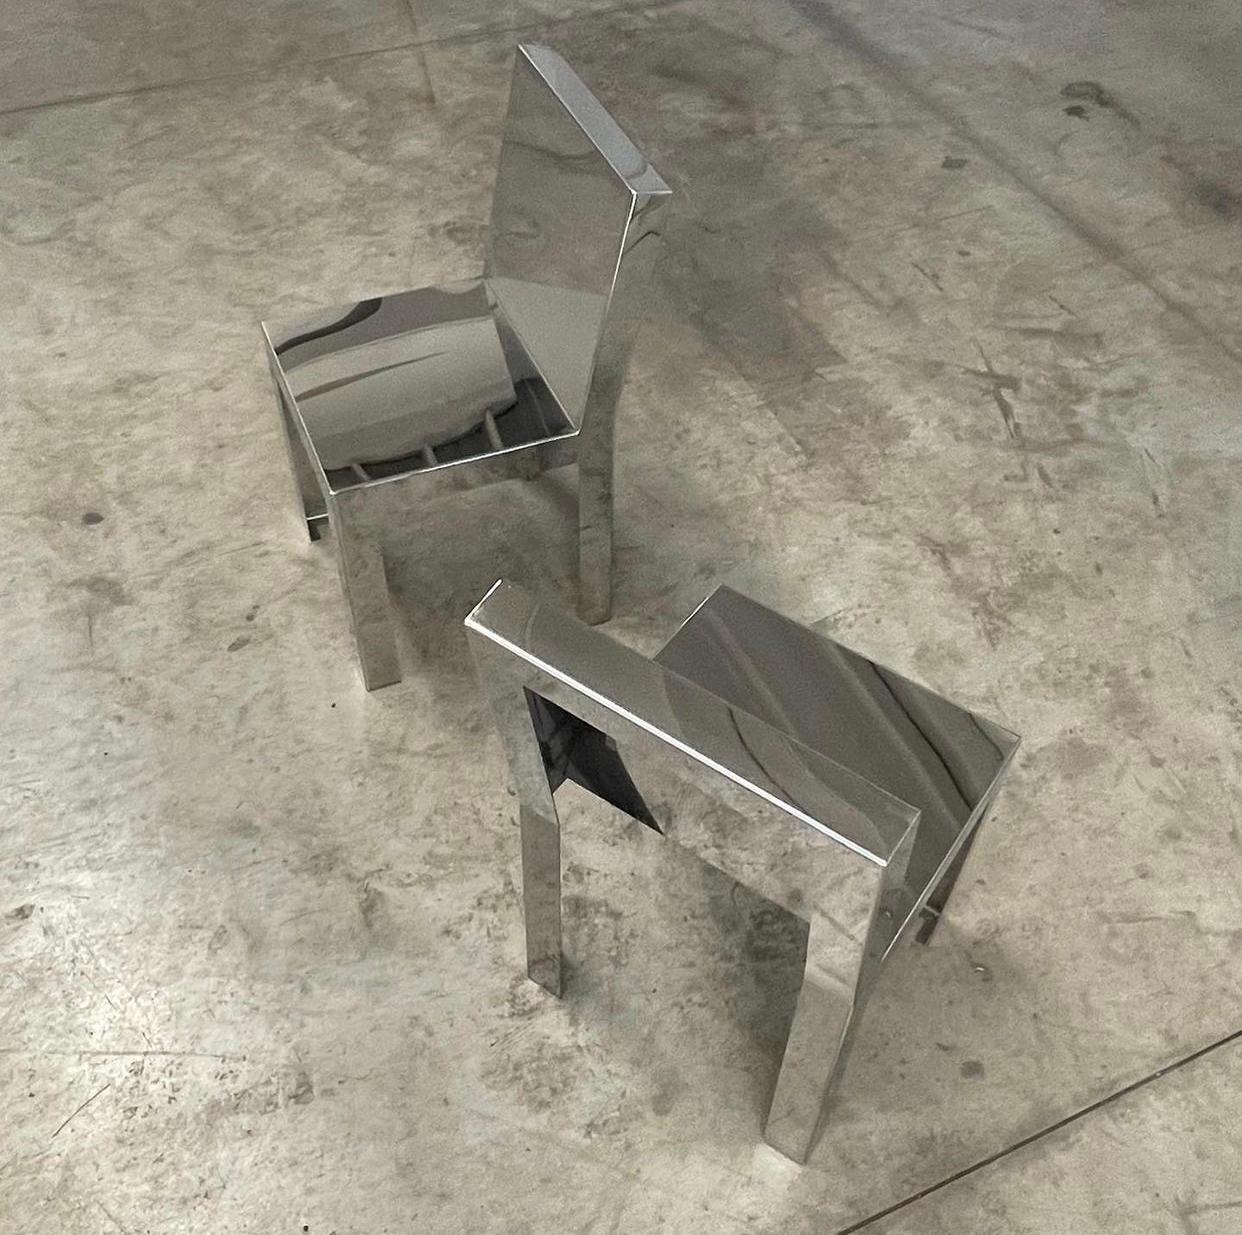 The chair SEDIA 1 is made by hand from a single folded stainless steel sheet. The few necessary welding seams are hidden yet visible inside the folding. The exterior of the chair is completely mirror polished and reflects the environment. Hence, the